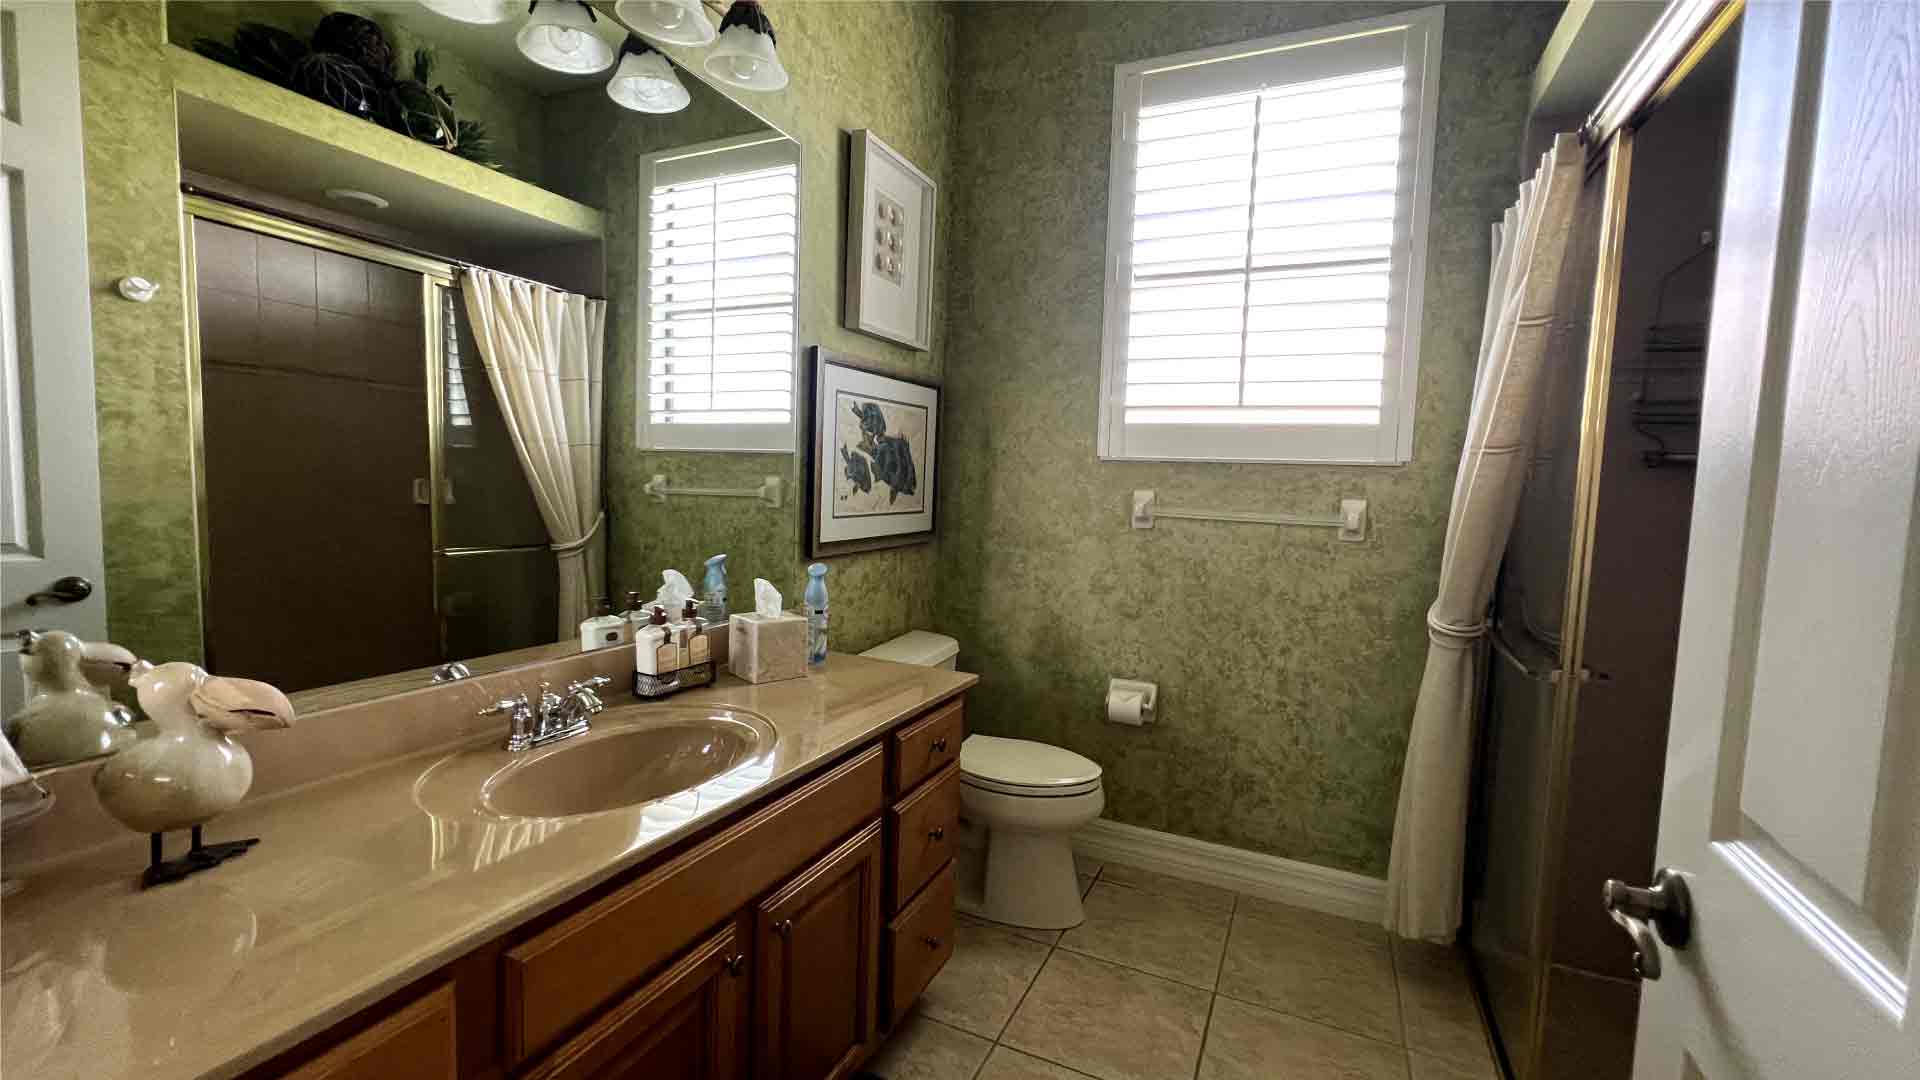 Bathroom - Regular cleaning in Cape Coral by Goldmillio - Apr 8